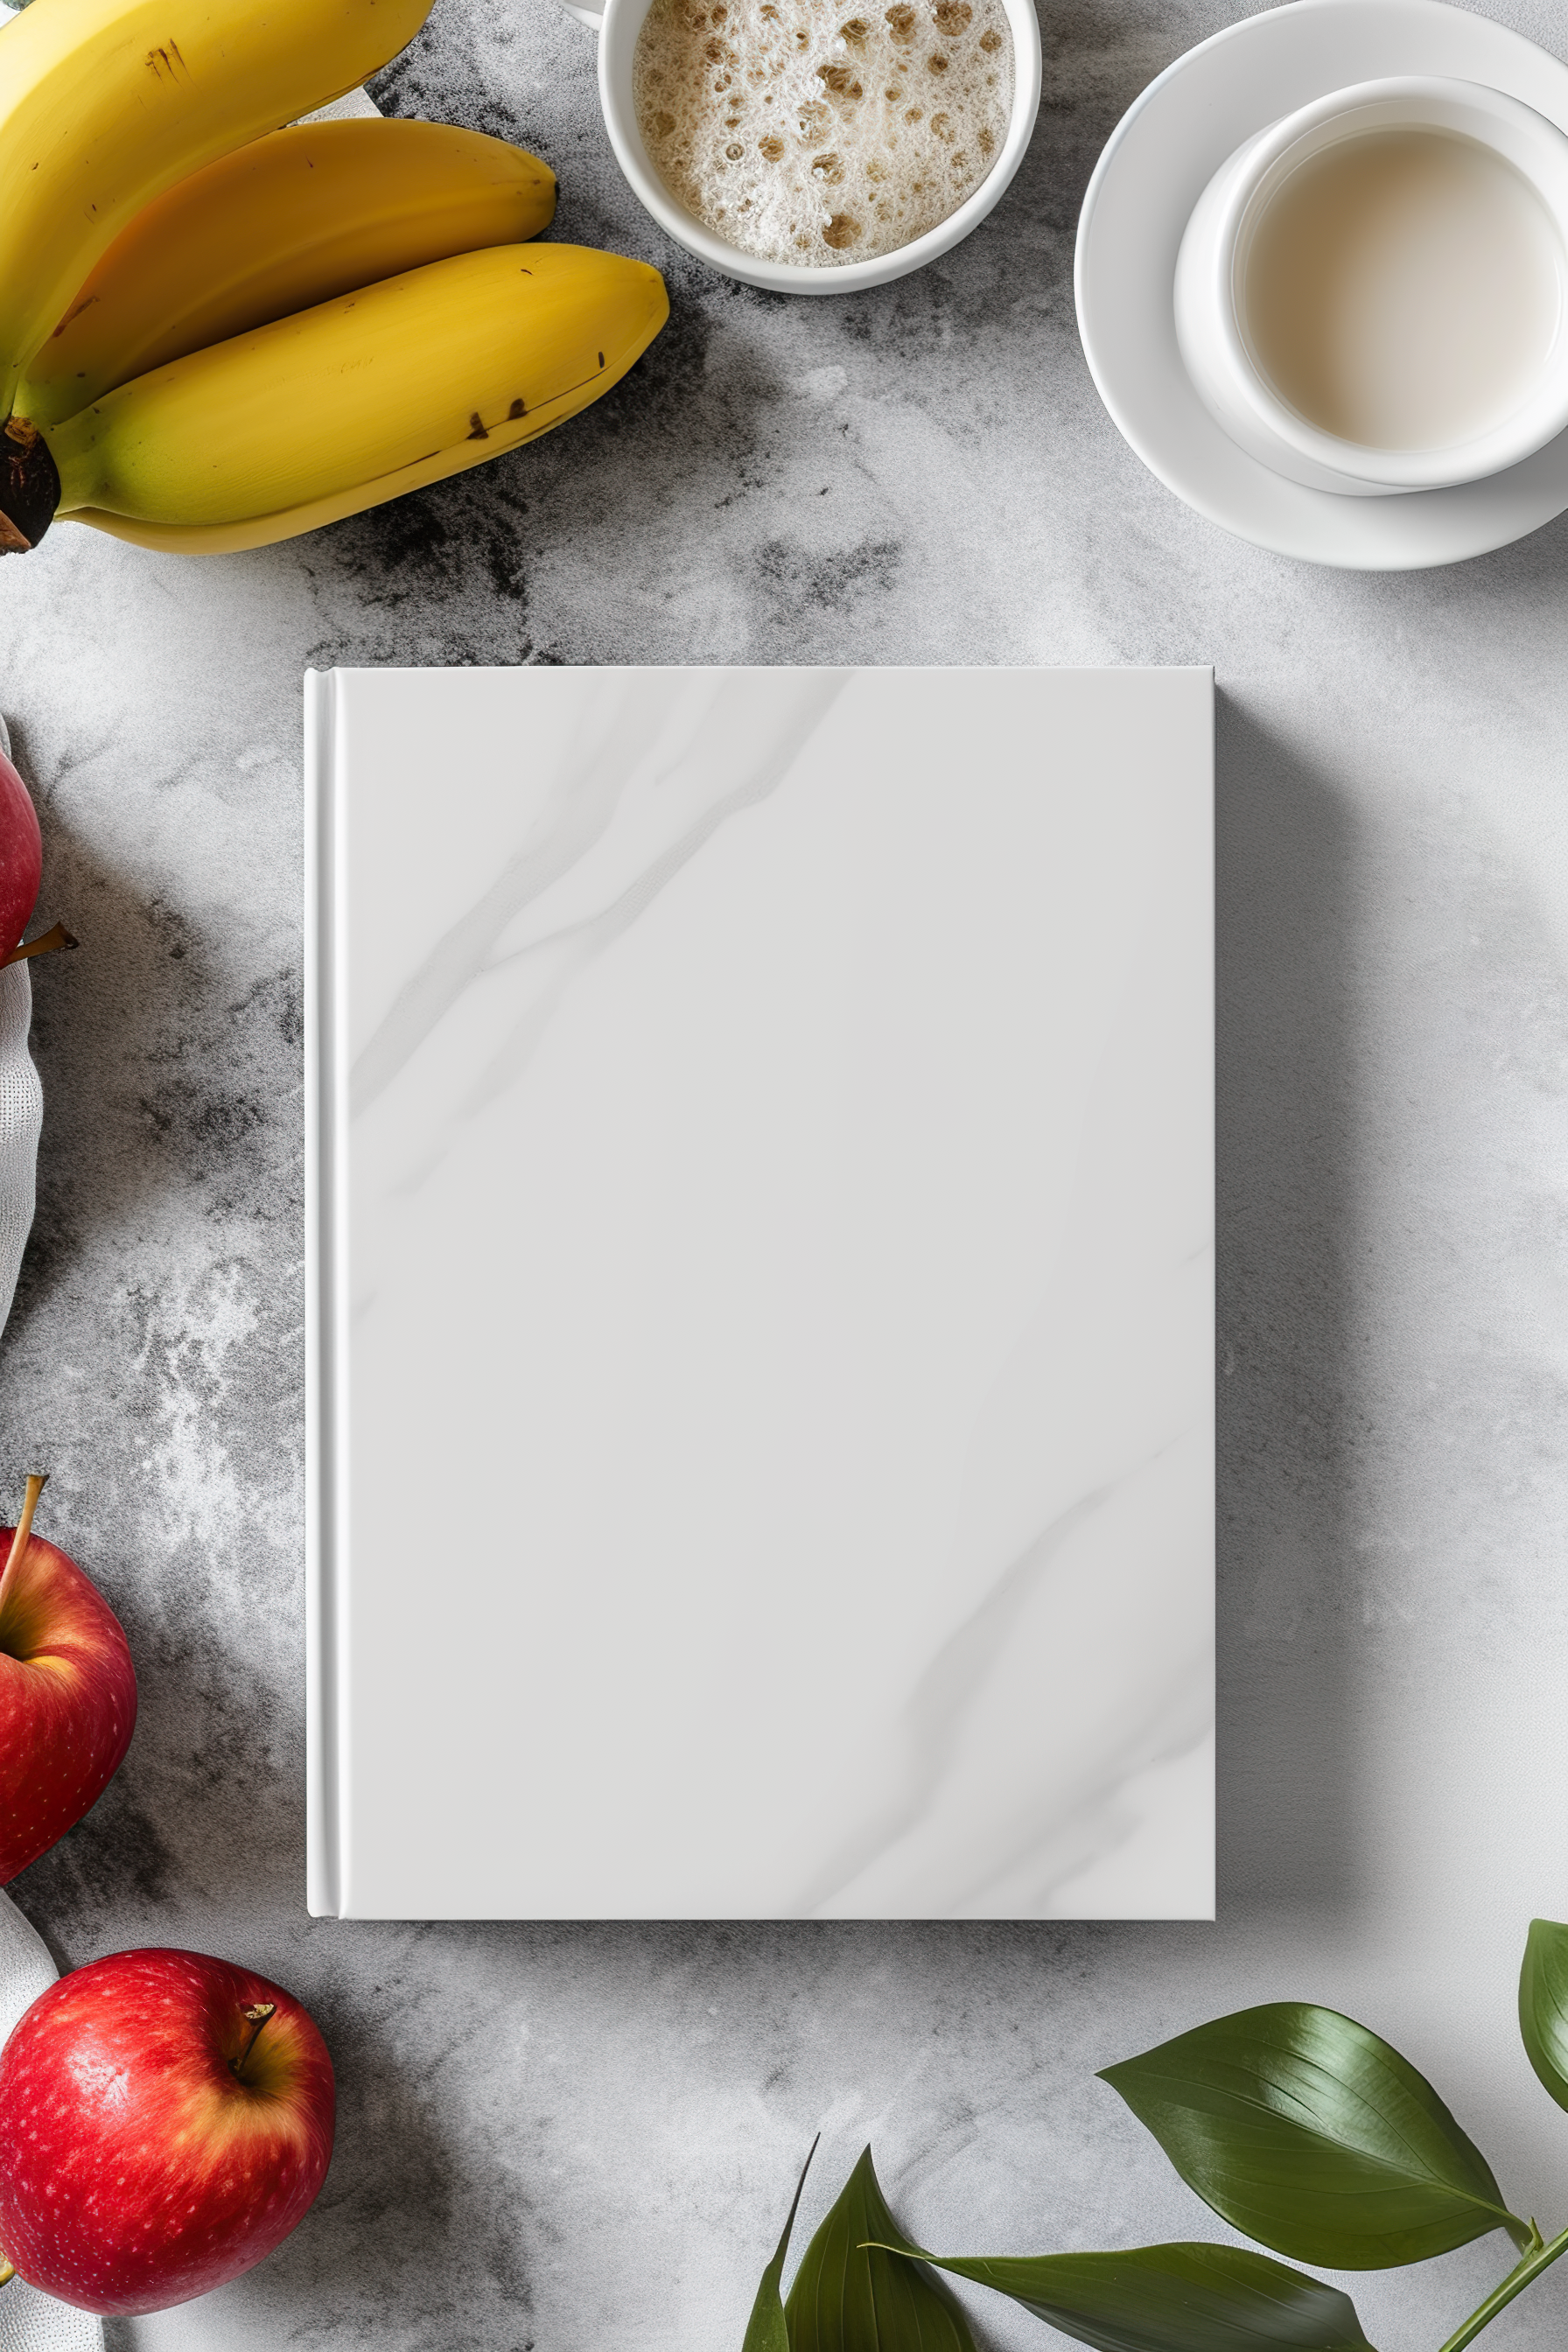 Hardcover journal blank mockup with fruits